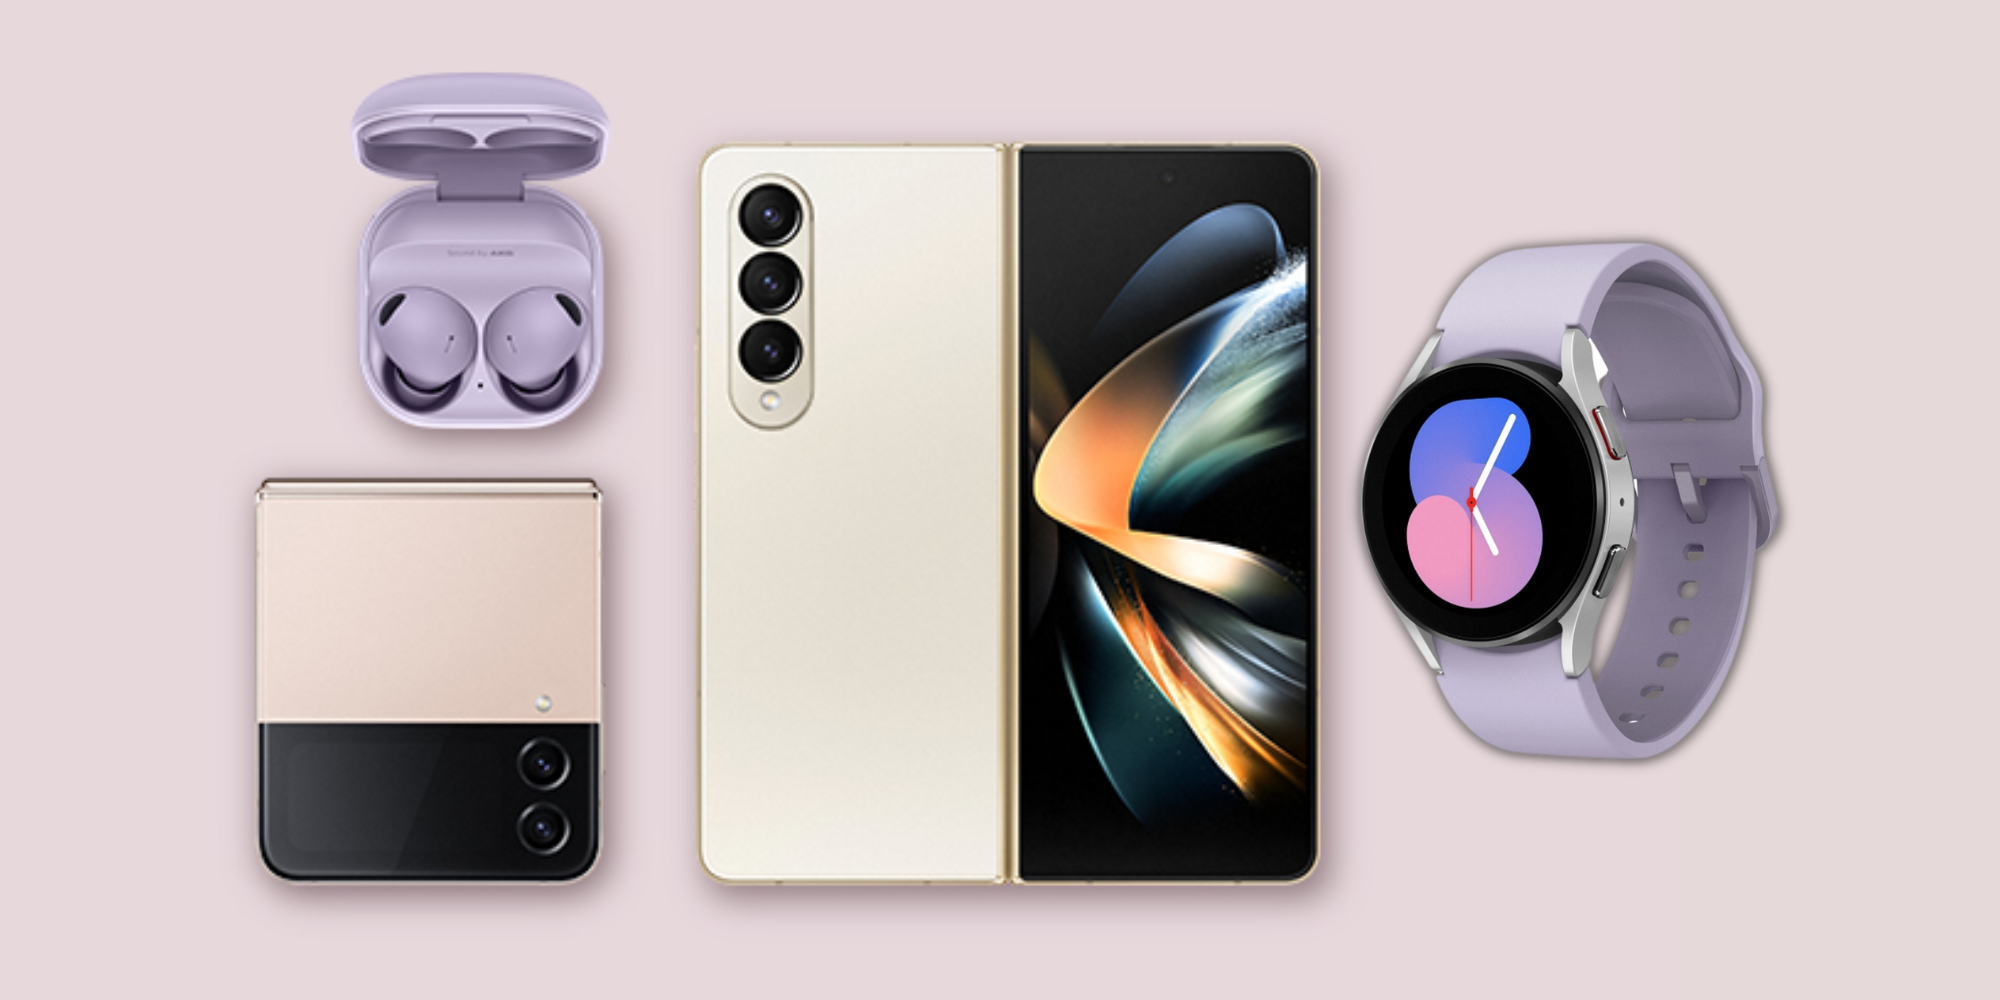 Samsung Galaxy Unpacked 2022 All Products